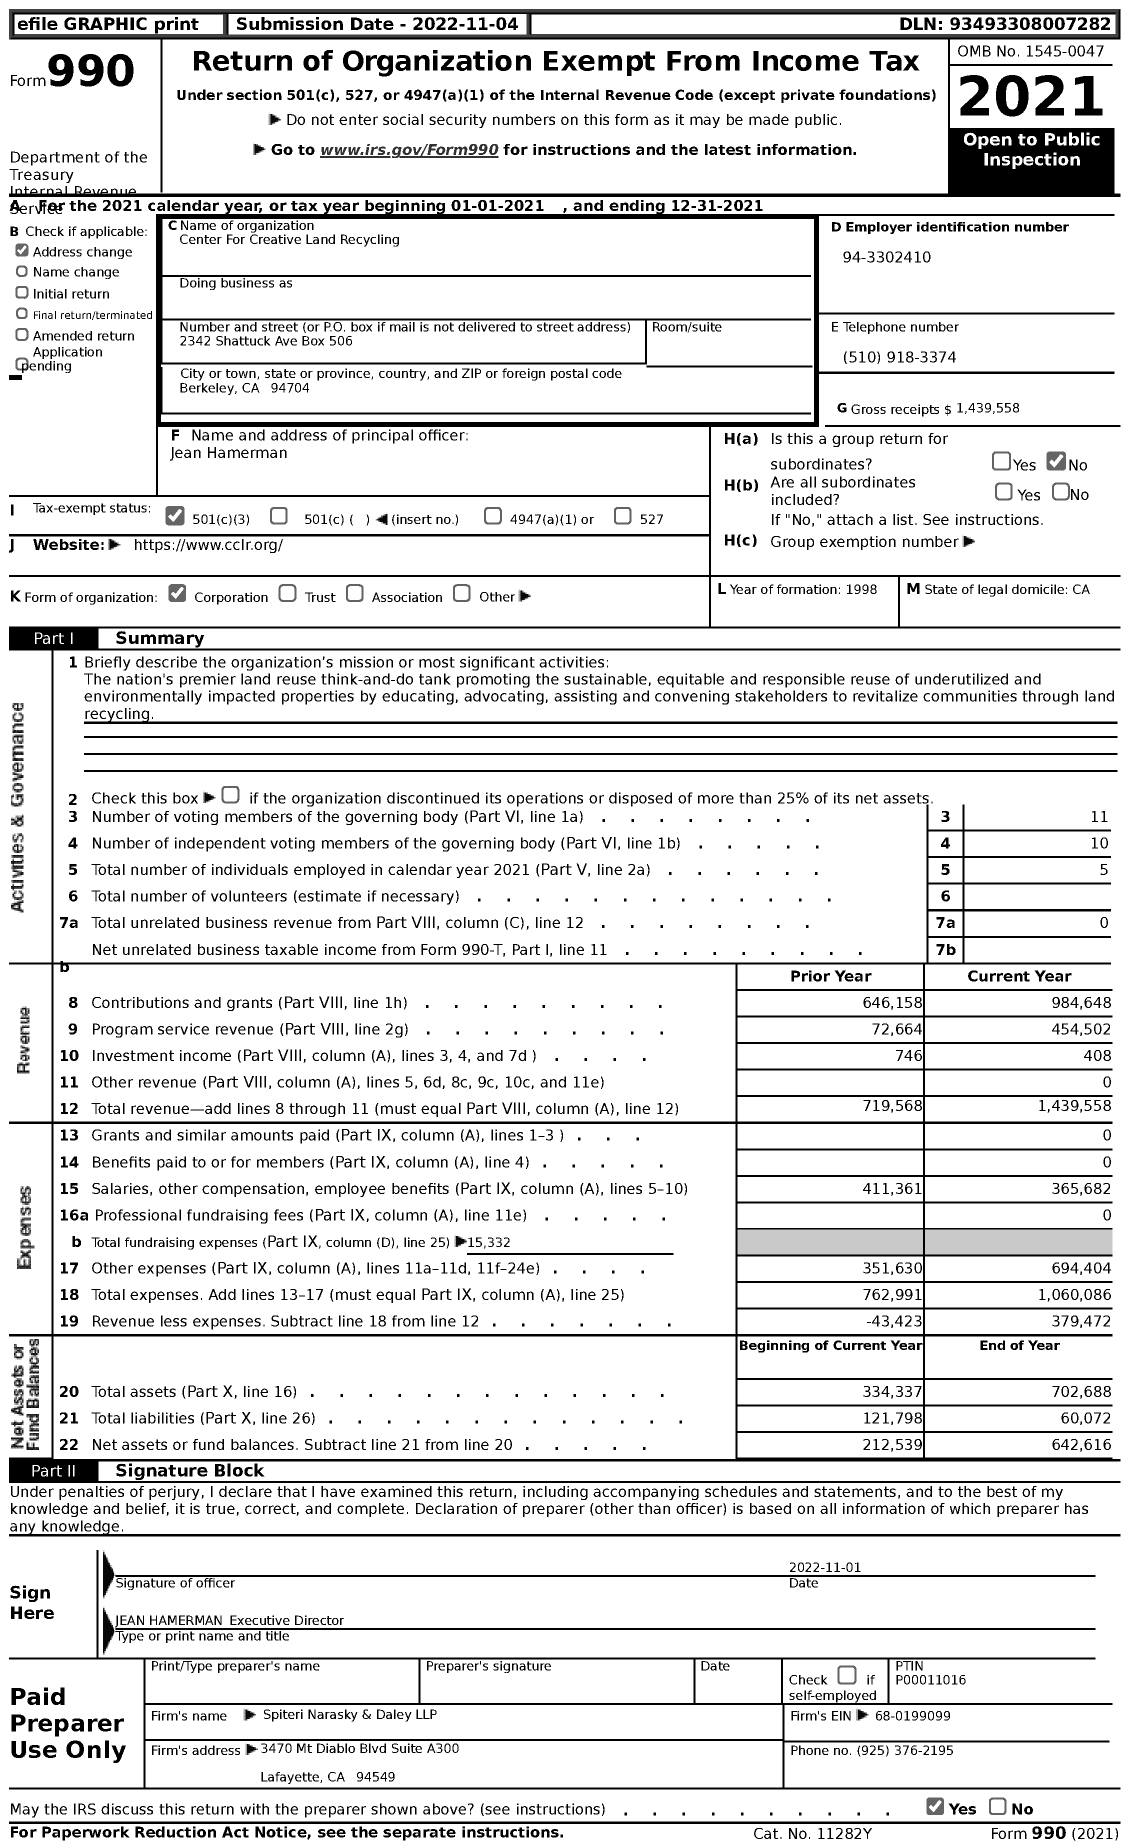 Image of first page of 2021 Form 990 for Center For Creative Land Recycling